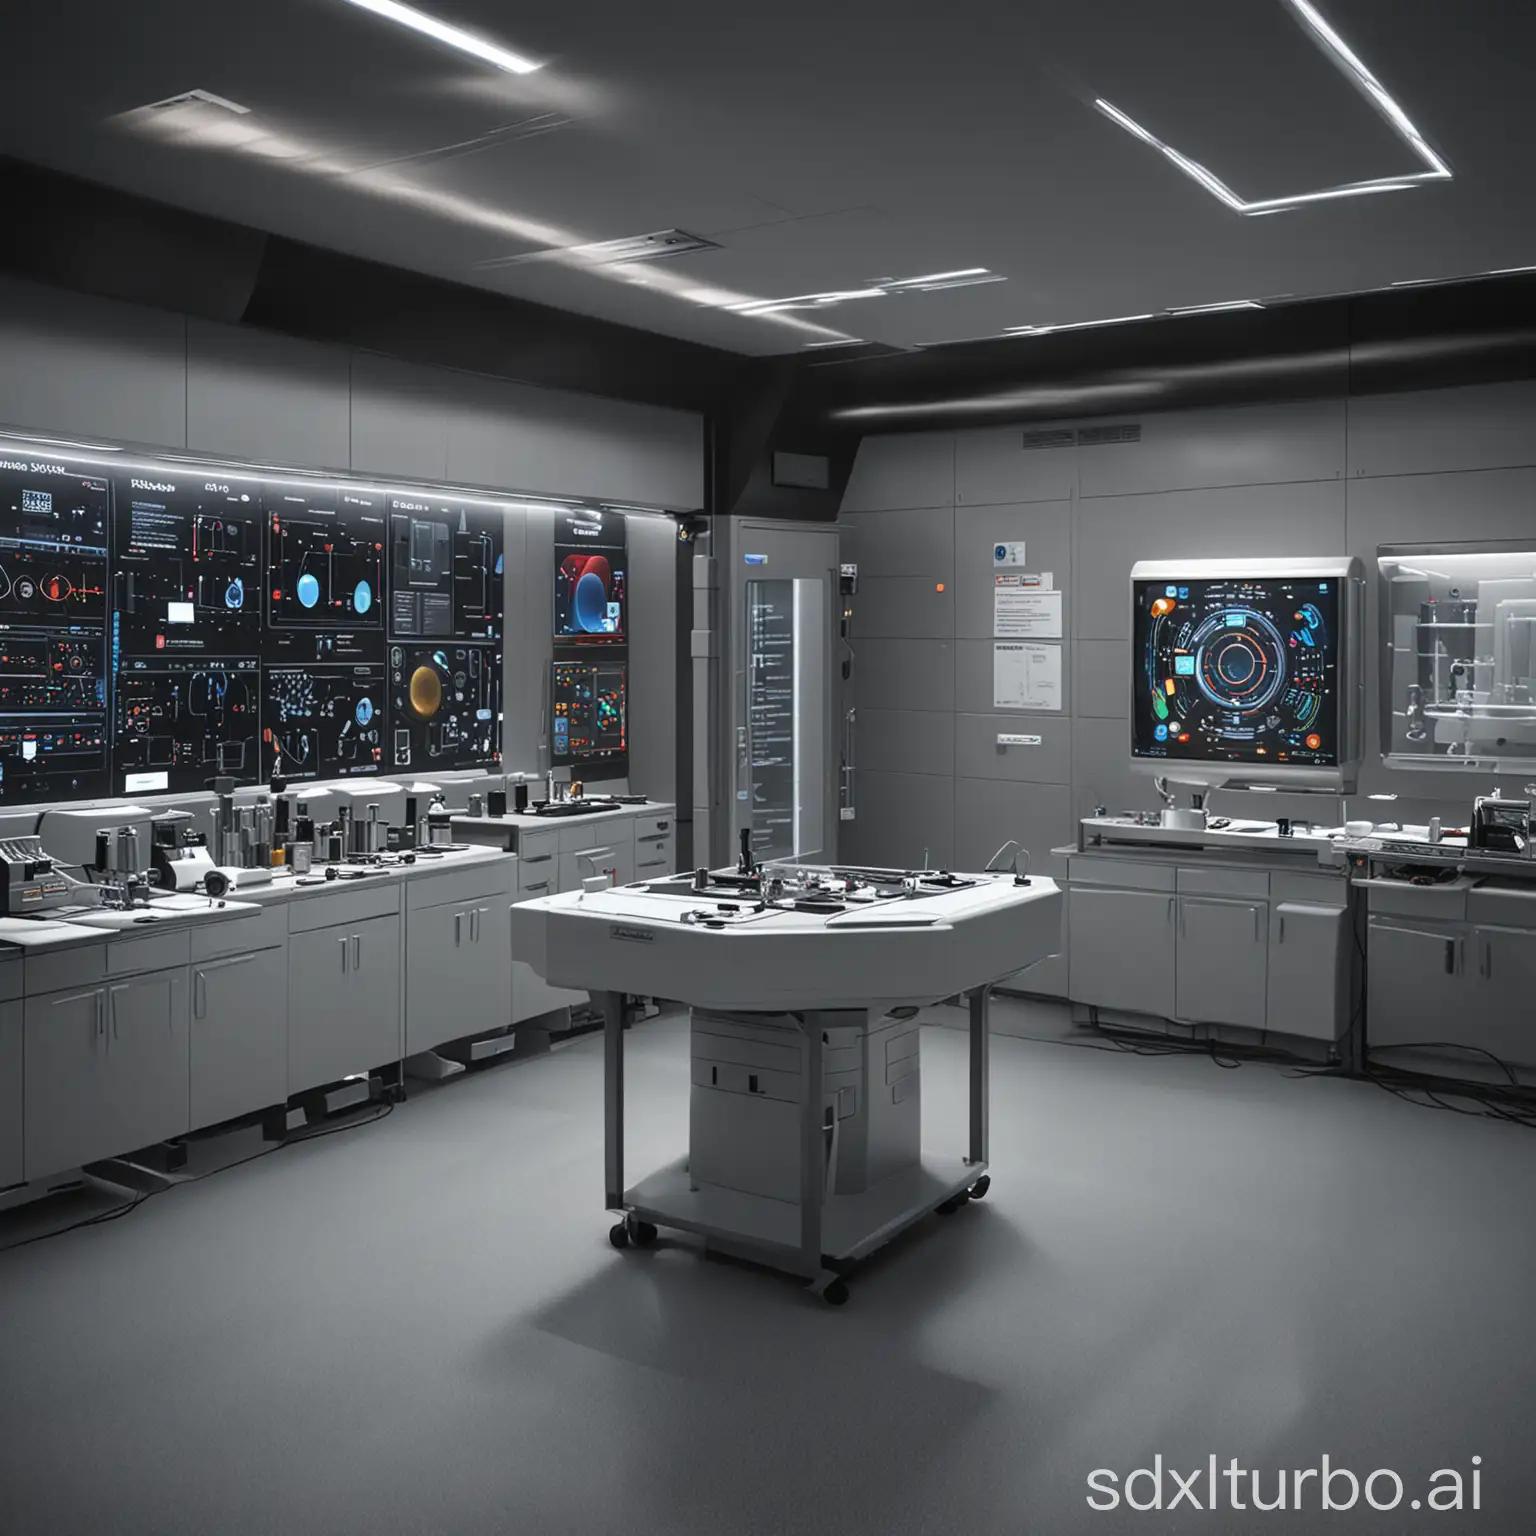 In this image, you can see a fantasy space of a modern technology laboratory. The lab is full of futuristic technological elements, with flickering LED lights on the walls and soft reflections on the floor. On the central countertop, there is a 3D rendering of a hand-held spectroscopic instrument with a strong sense of science and technology, and the smooth surface reflects a shimmering light. The display of the spectrometer displays a rich and colorful spectral spectrum.  The whole scene is full of futuristic technology, making people feel like they are in a science fiction movie-like laboratory, full of mystery and exploration. Hopefully, this description will help you build the visual scene you want!If you have any other questions or needs, please feel free to let me know.